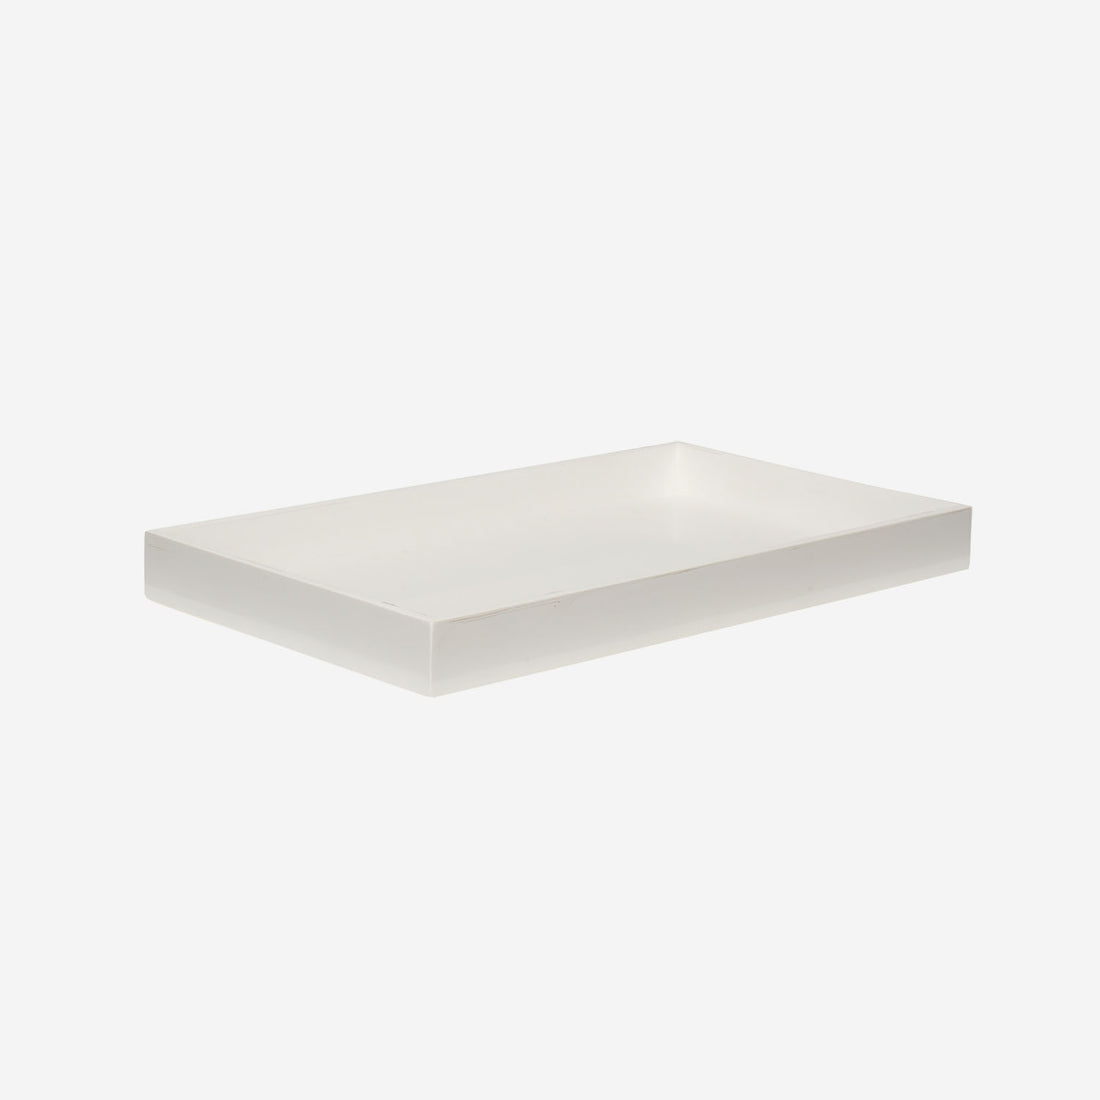 Lacquer Tray White 15x8.7 inch